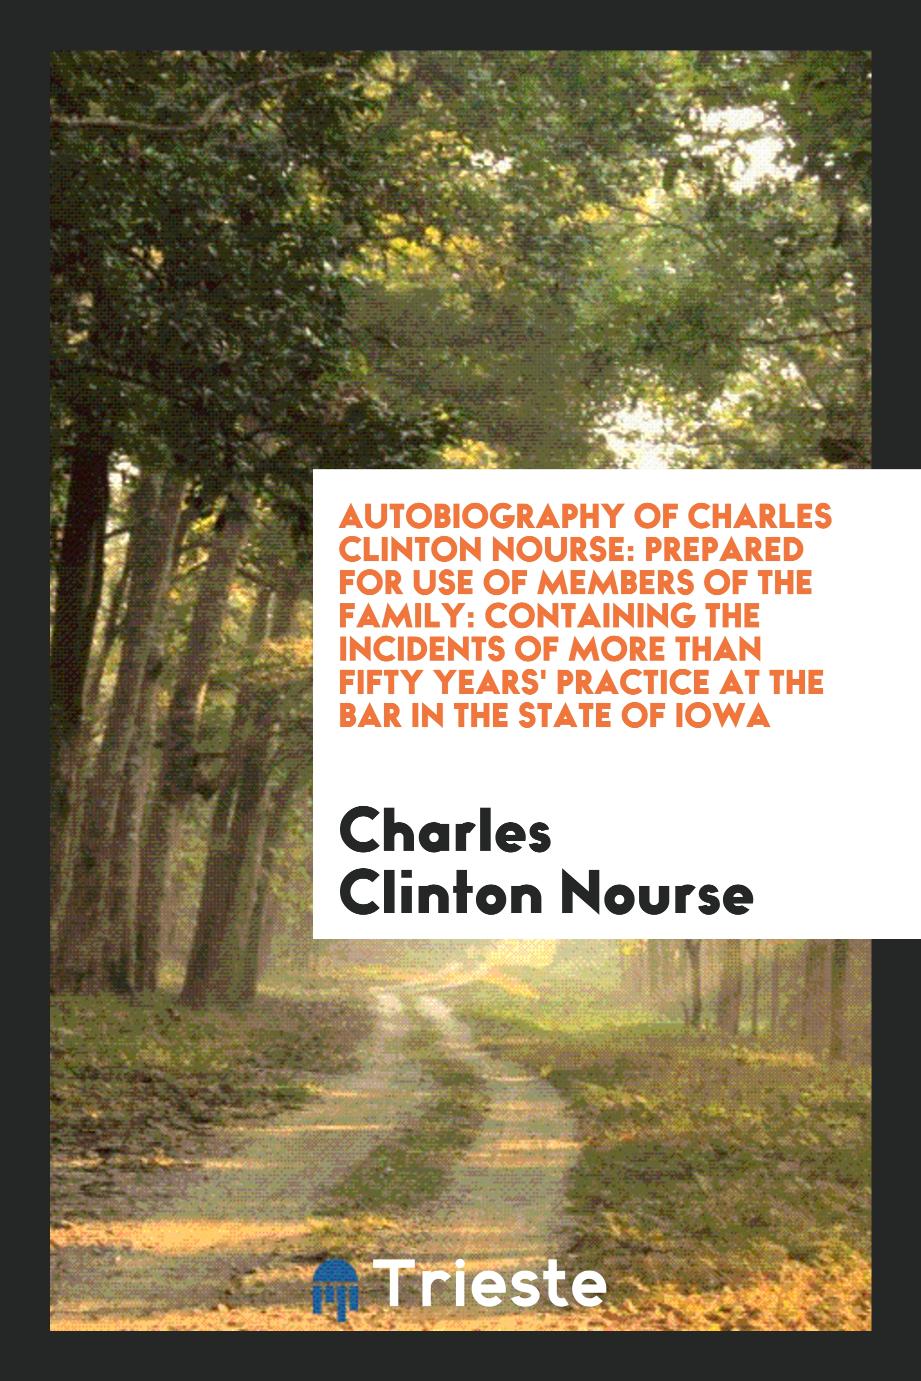 Autobiography of Charles Clinton Nourse: prepared for use of members of the family: containing the incidents of more than fifty years' practice at the bar in the state of Iowa